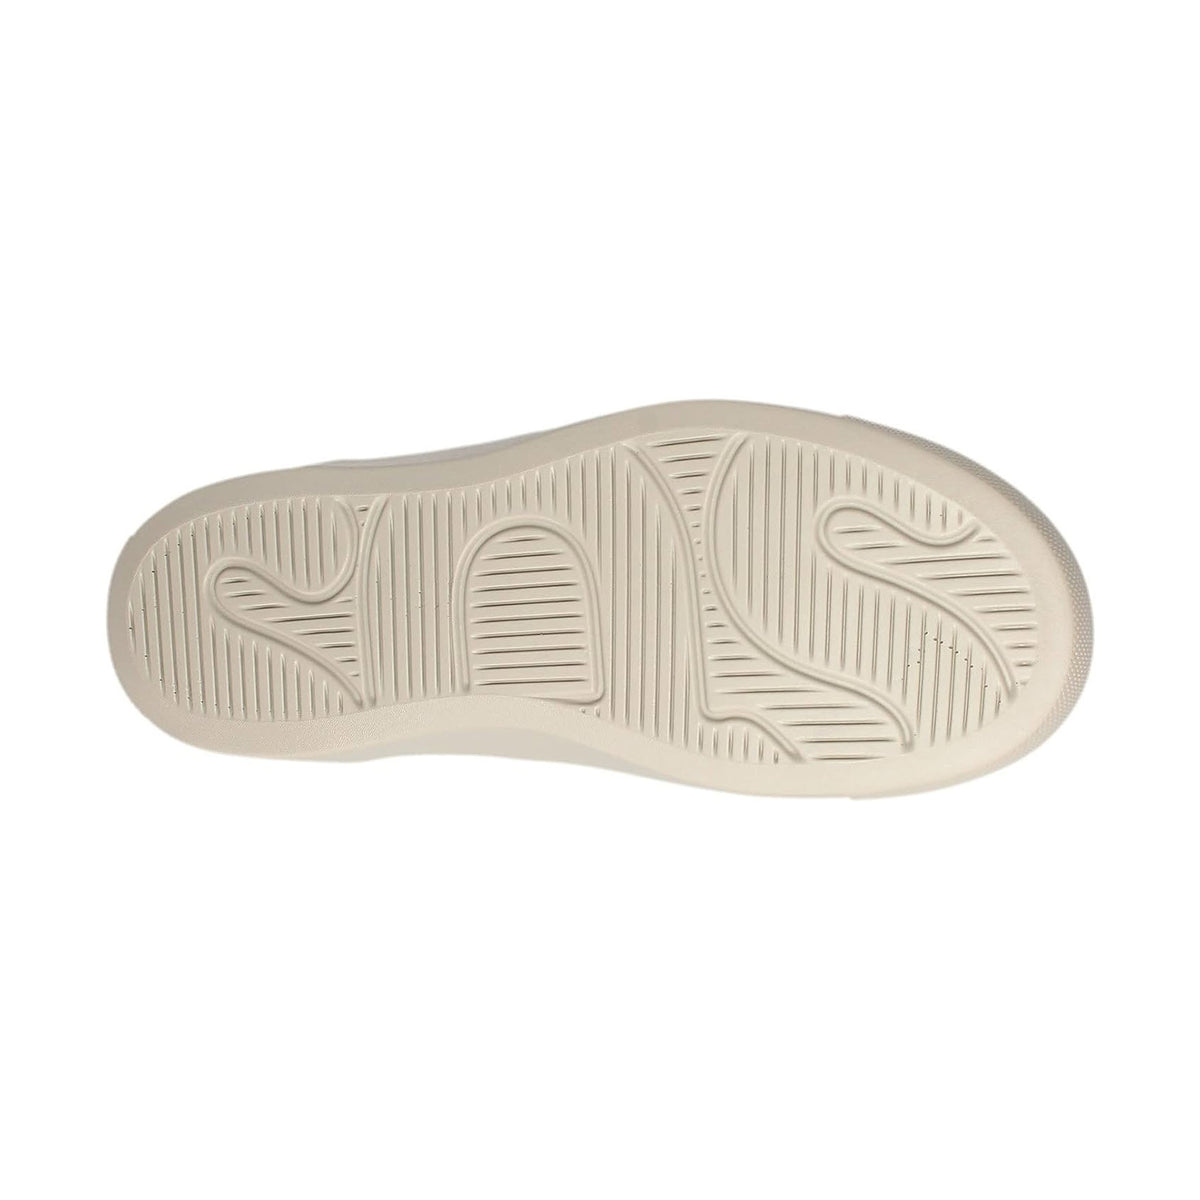 Sole of a SAS High Street Oxford Almond - Mens sneaker displayed against a white background, showcasing intricate tread patterns and a removable cushioned footbed designed for classic comfort.